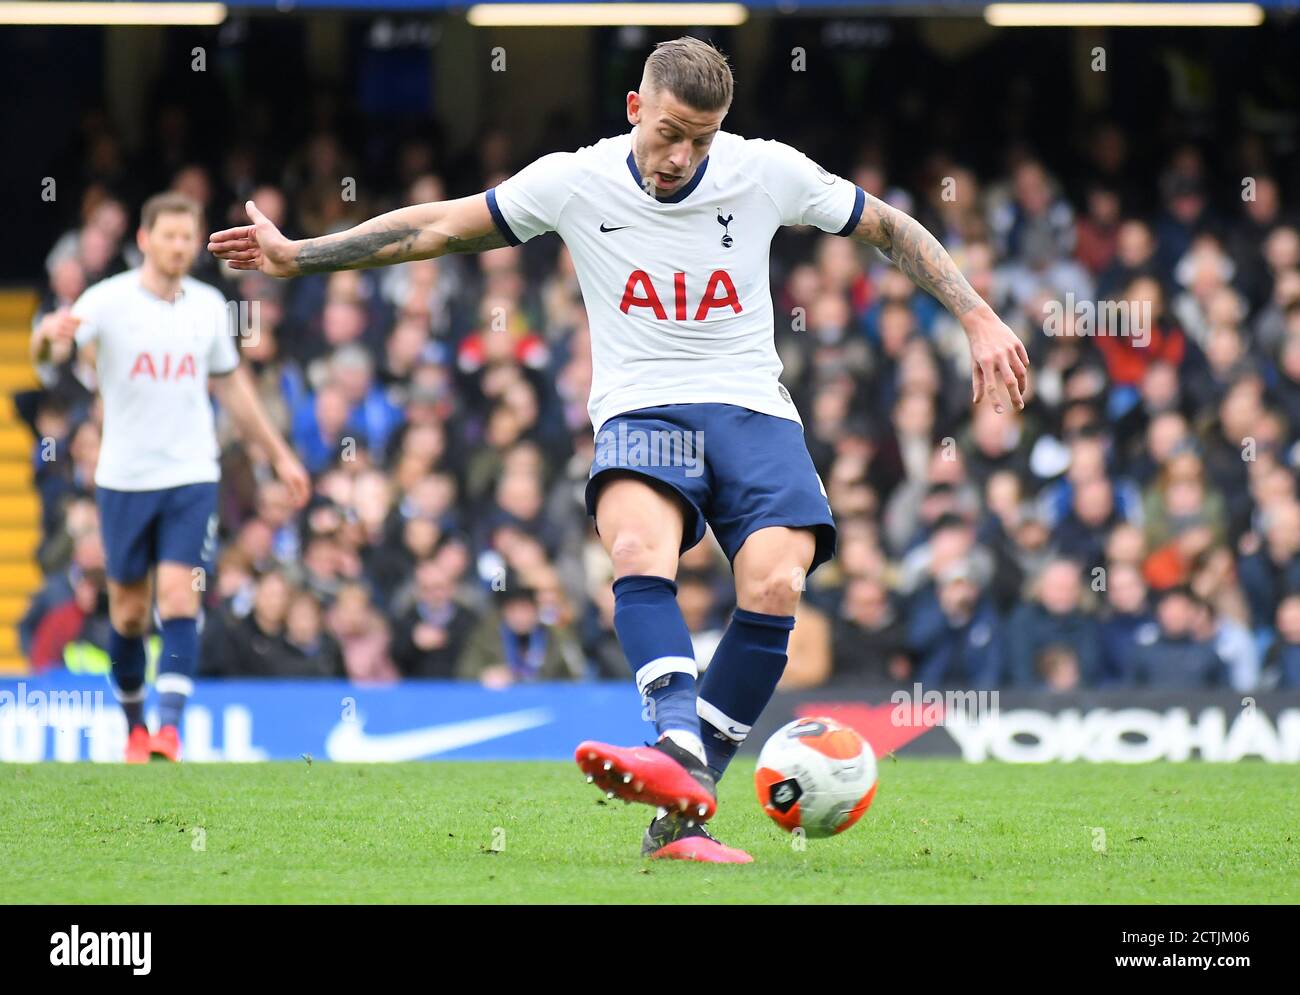 LONDON, ENGLAND - FEBRUARY 22, 2020: Toby Alderweireld of Tottenham pictured during the 2019/20 Premier League game between Chelsea FC and Tottenham Hotspur FC at Stamford Bridge. Stock Photo